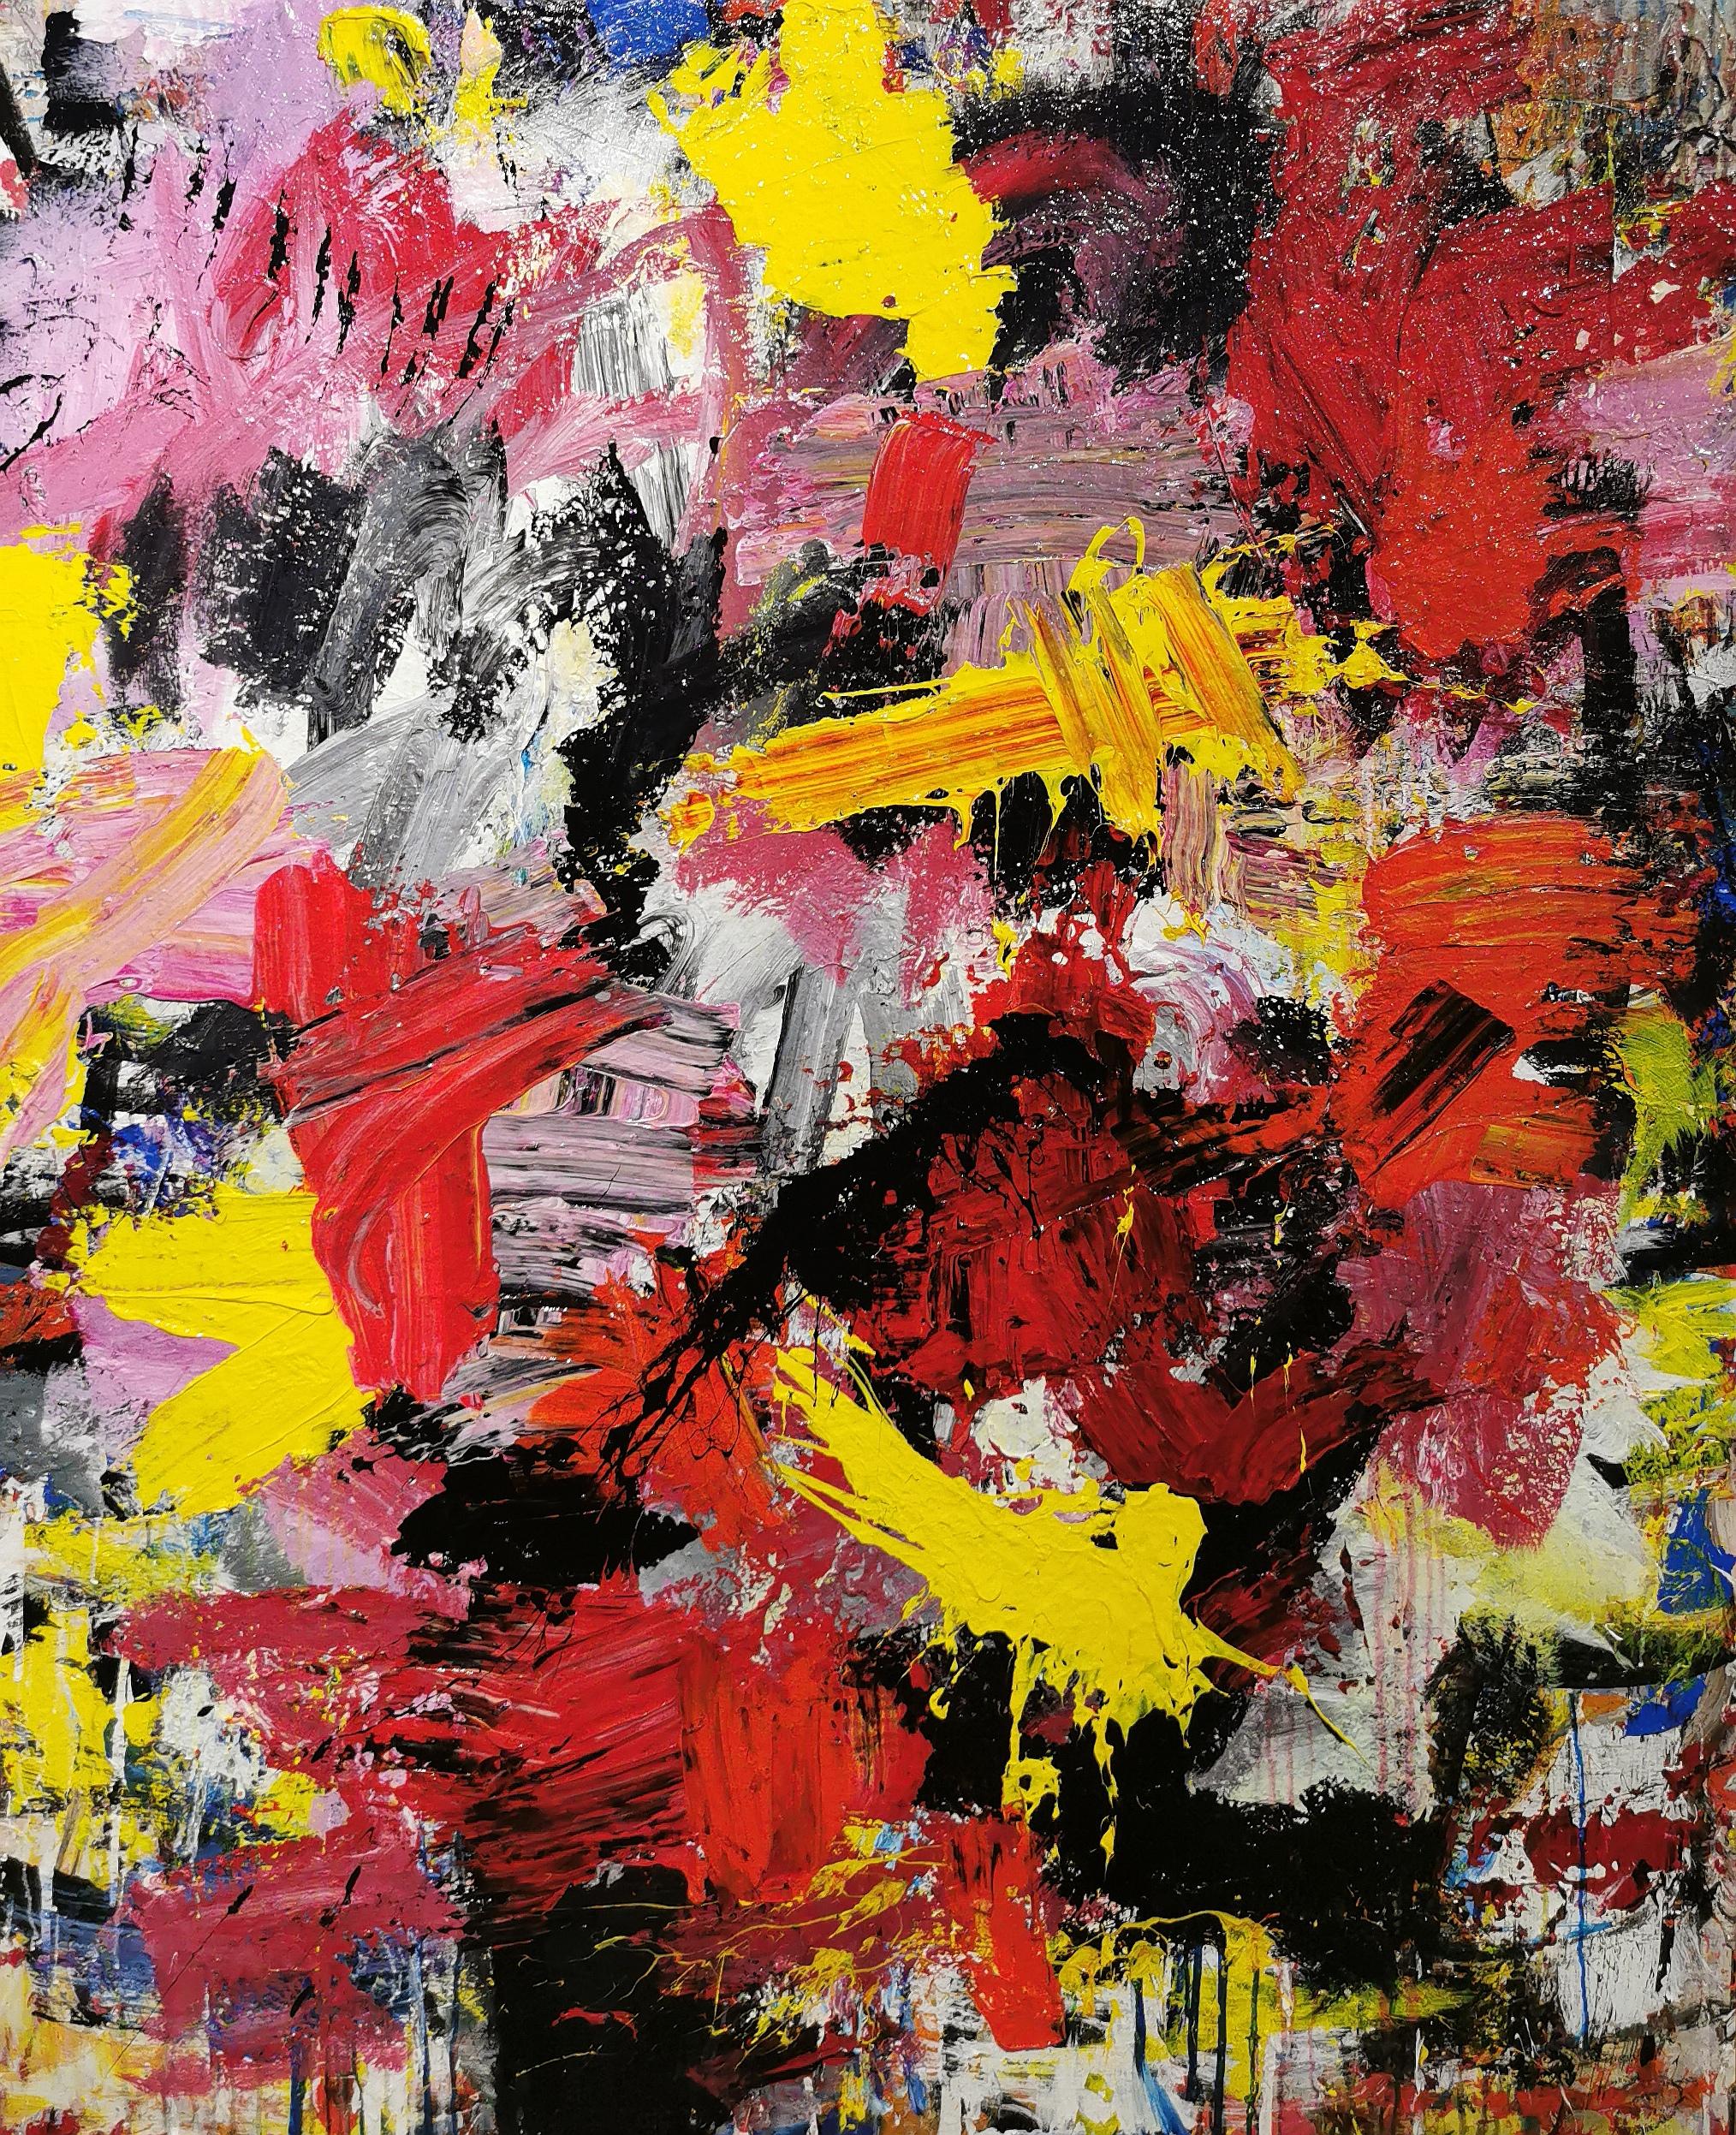 Large, Colourful Abstract Acrylic Painting "Untitled" - Mixed Media Art by Maico Camilo